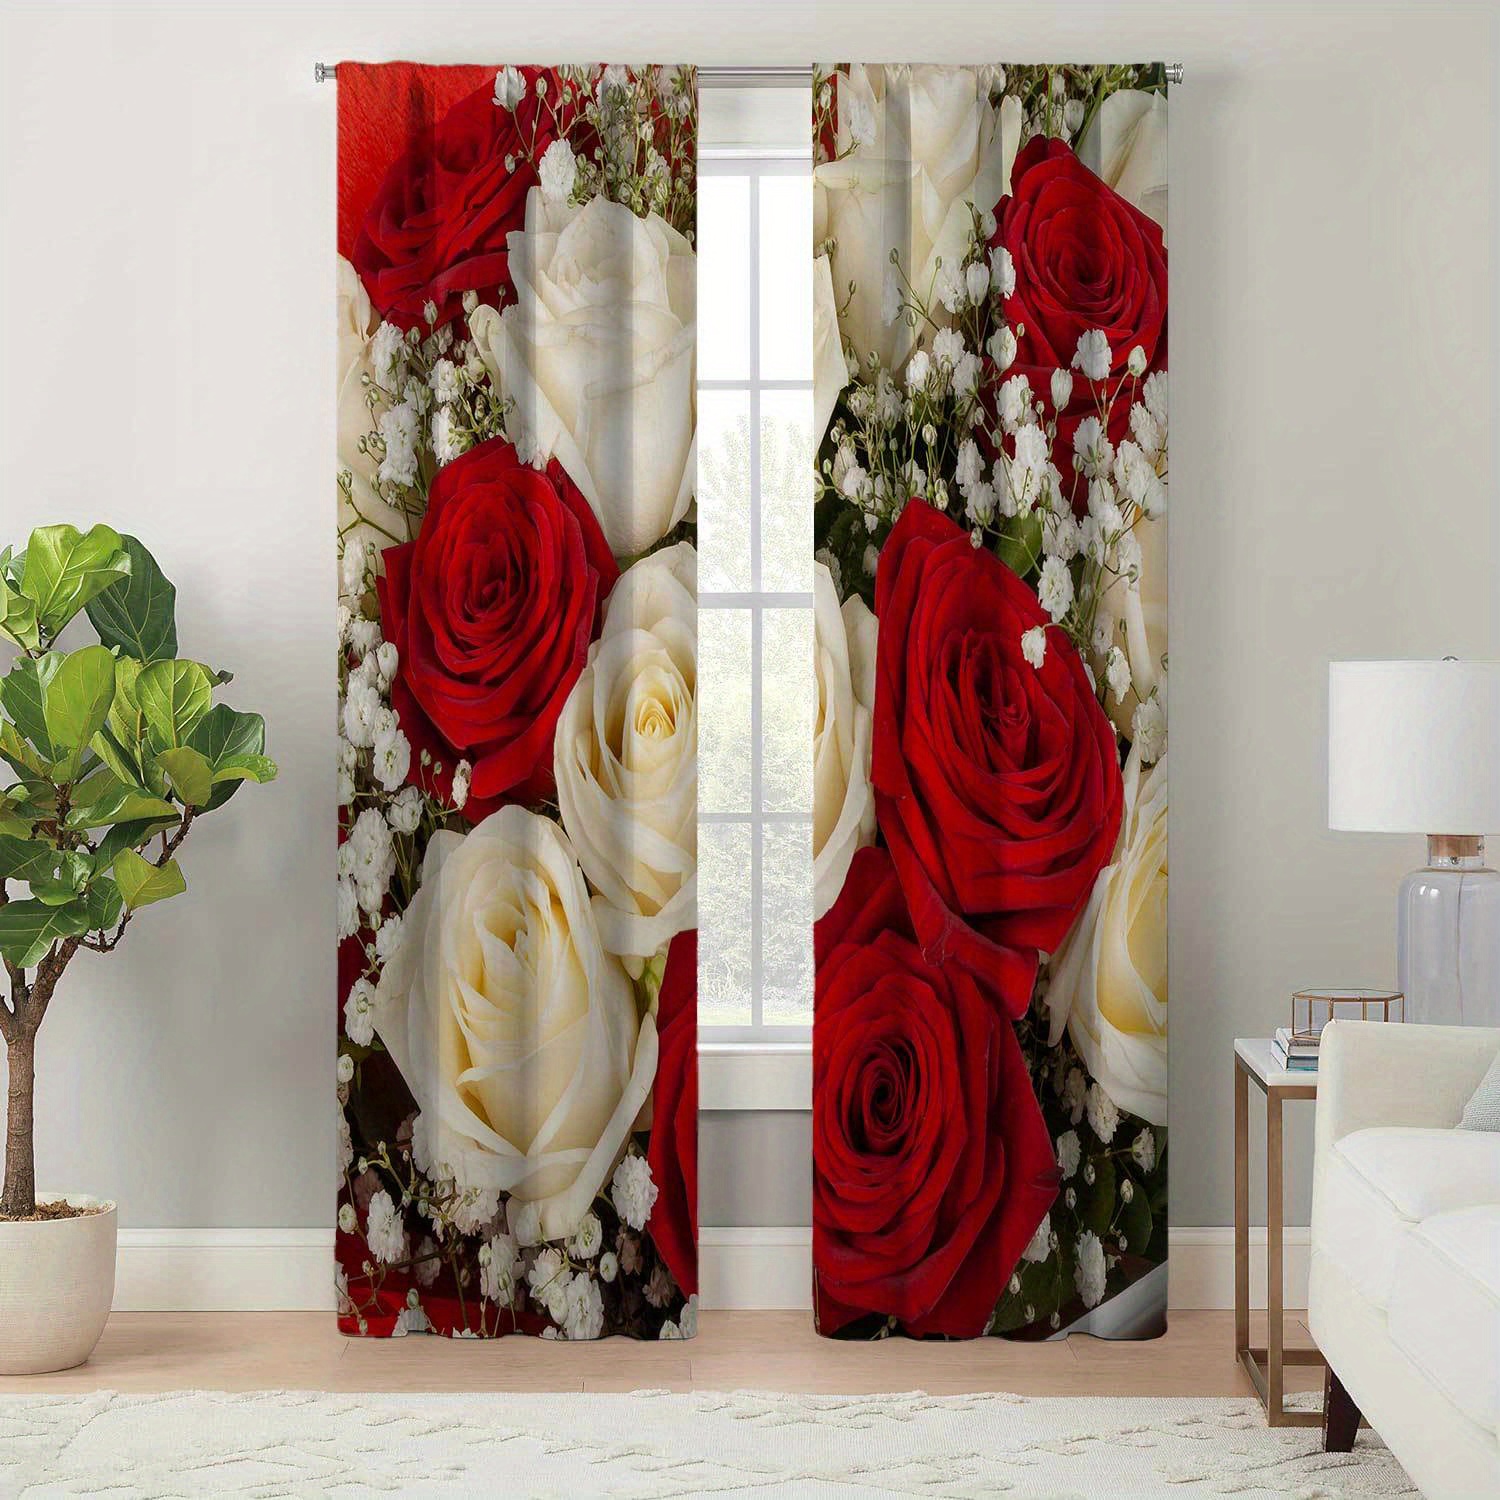 

2pcs, Rose Pattern Printed Curtains, Easy Care Durable Drapes For Living Room Bedroom, All-season Charming Floral Home Decor, Easy Hang